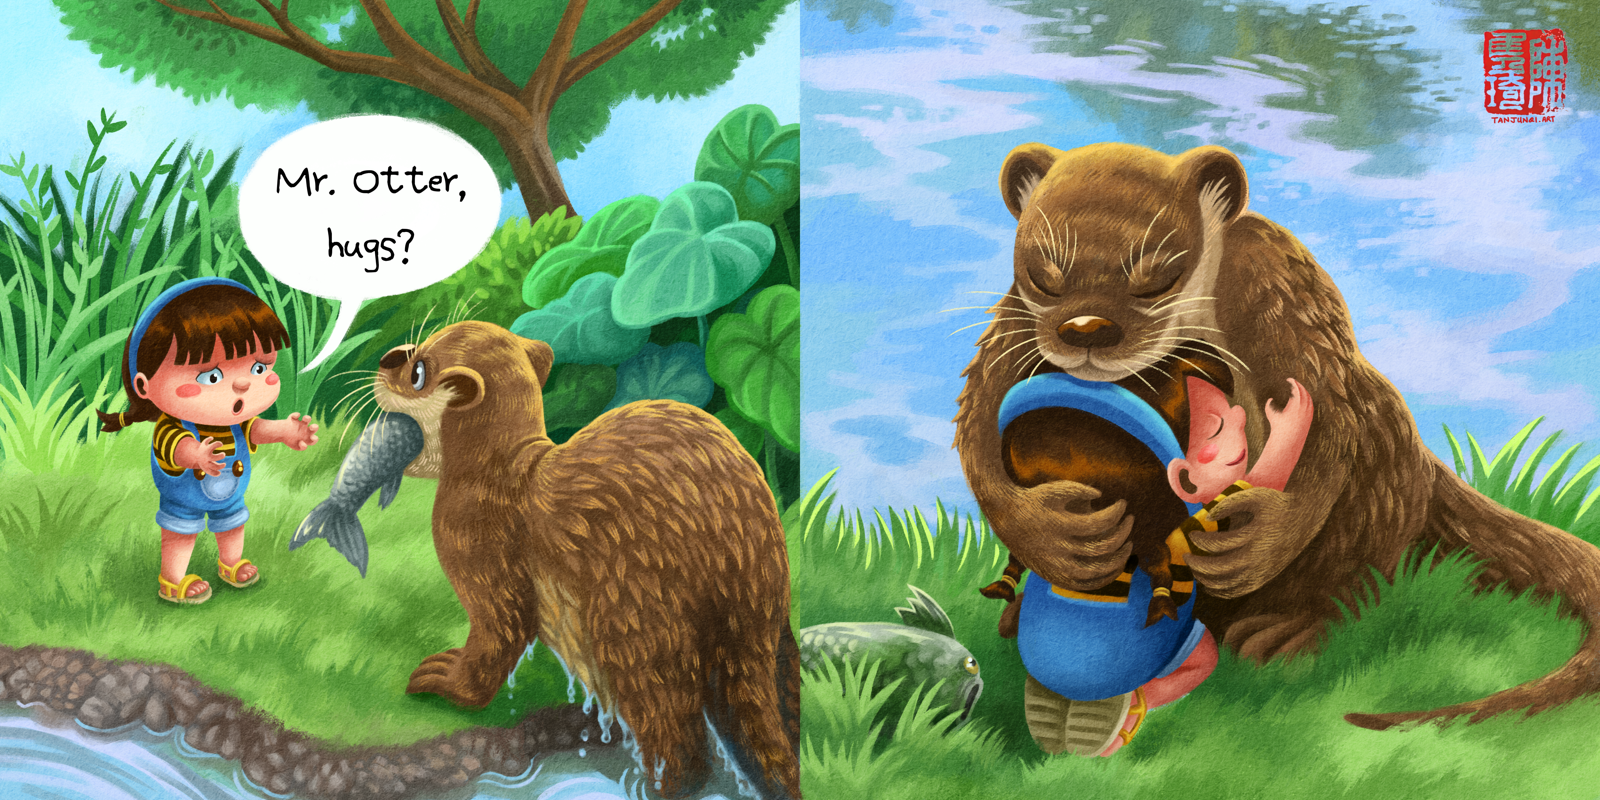 A two-page spread from 'Shan Shan Needs a Hug' (english version), showing Shan Shan asking Mr. Otter, who has just come out of the river having caught fish, for a hug. On the next page they hug next to the river.